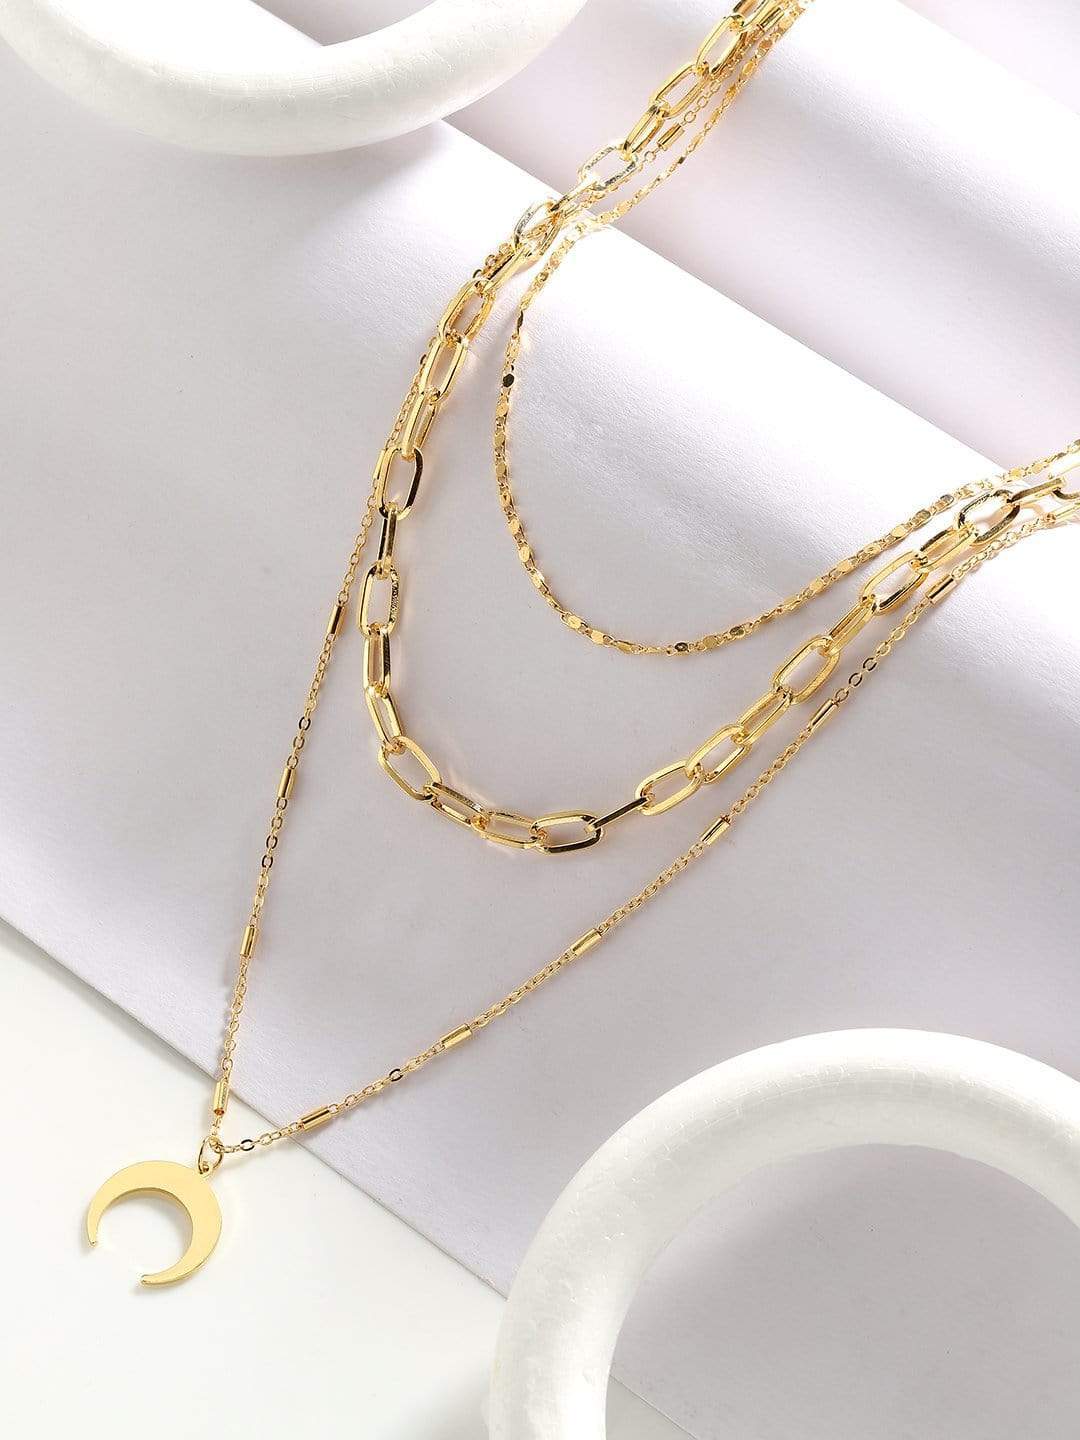 Buy online Gold Plated Chain Necklace from fashion jewellery for